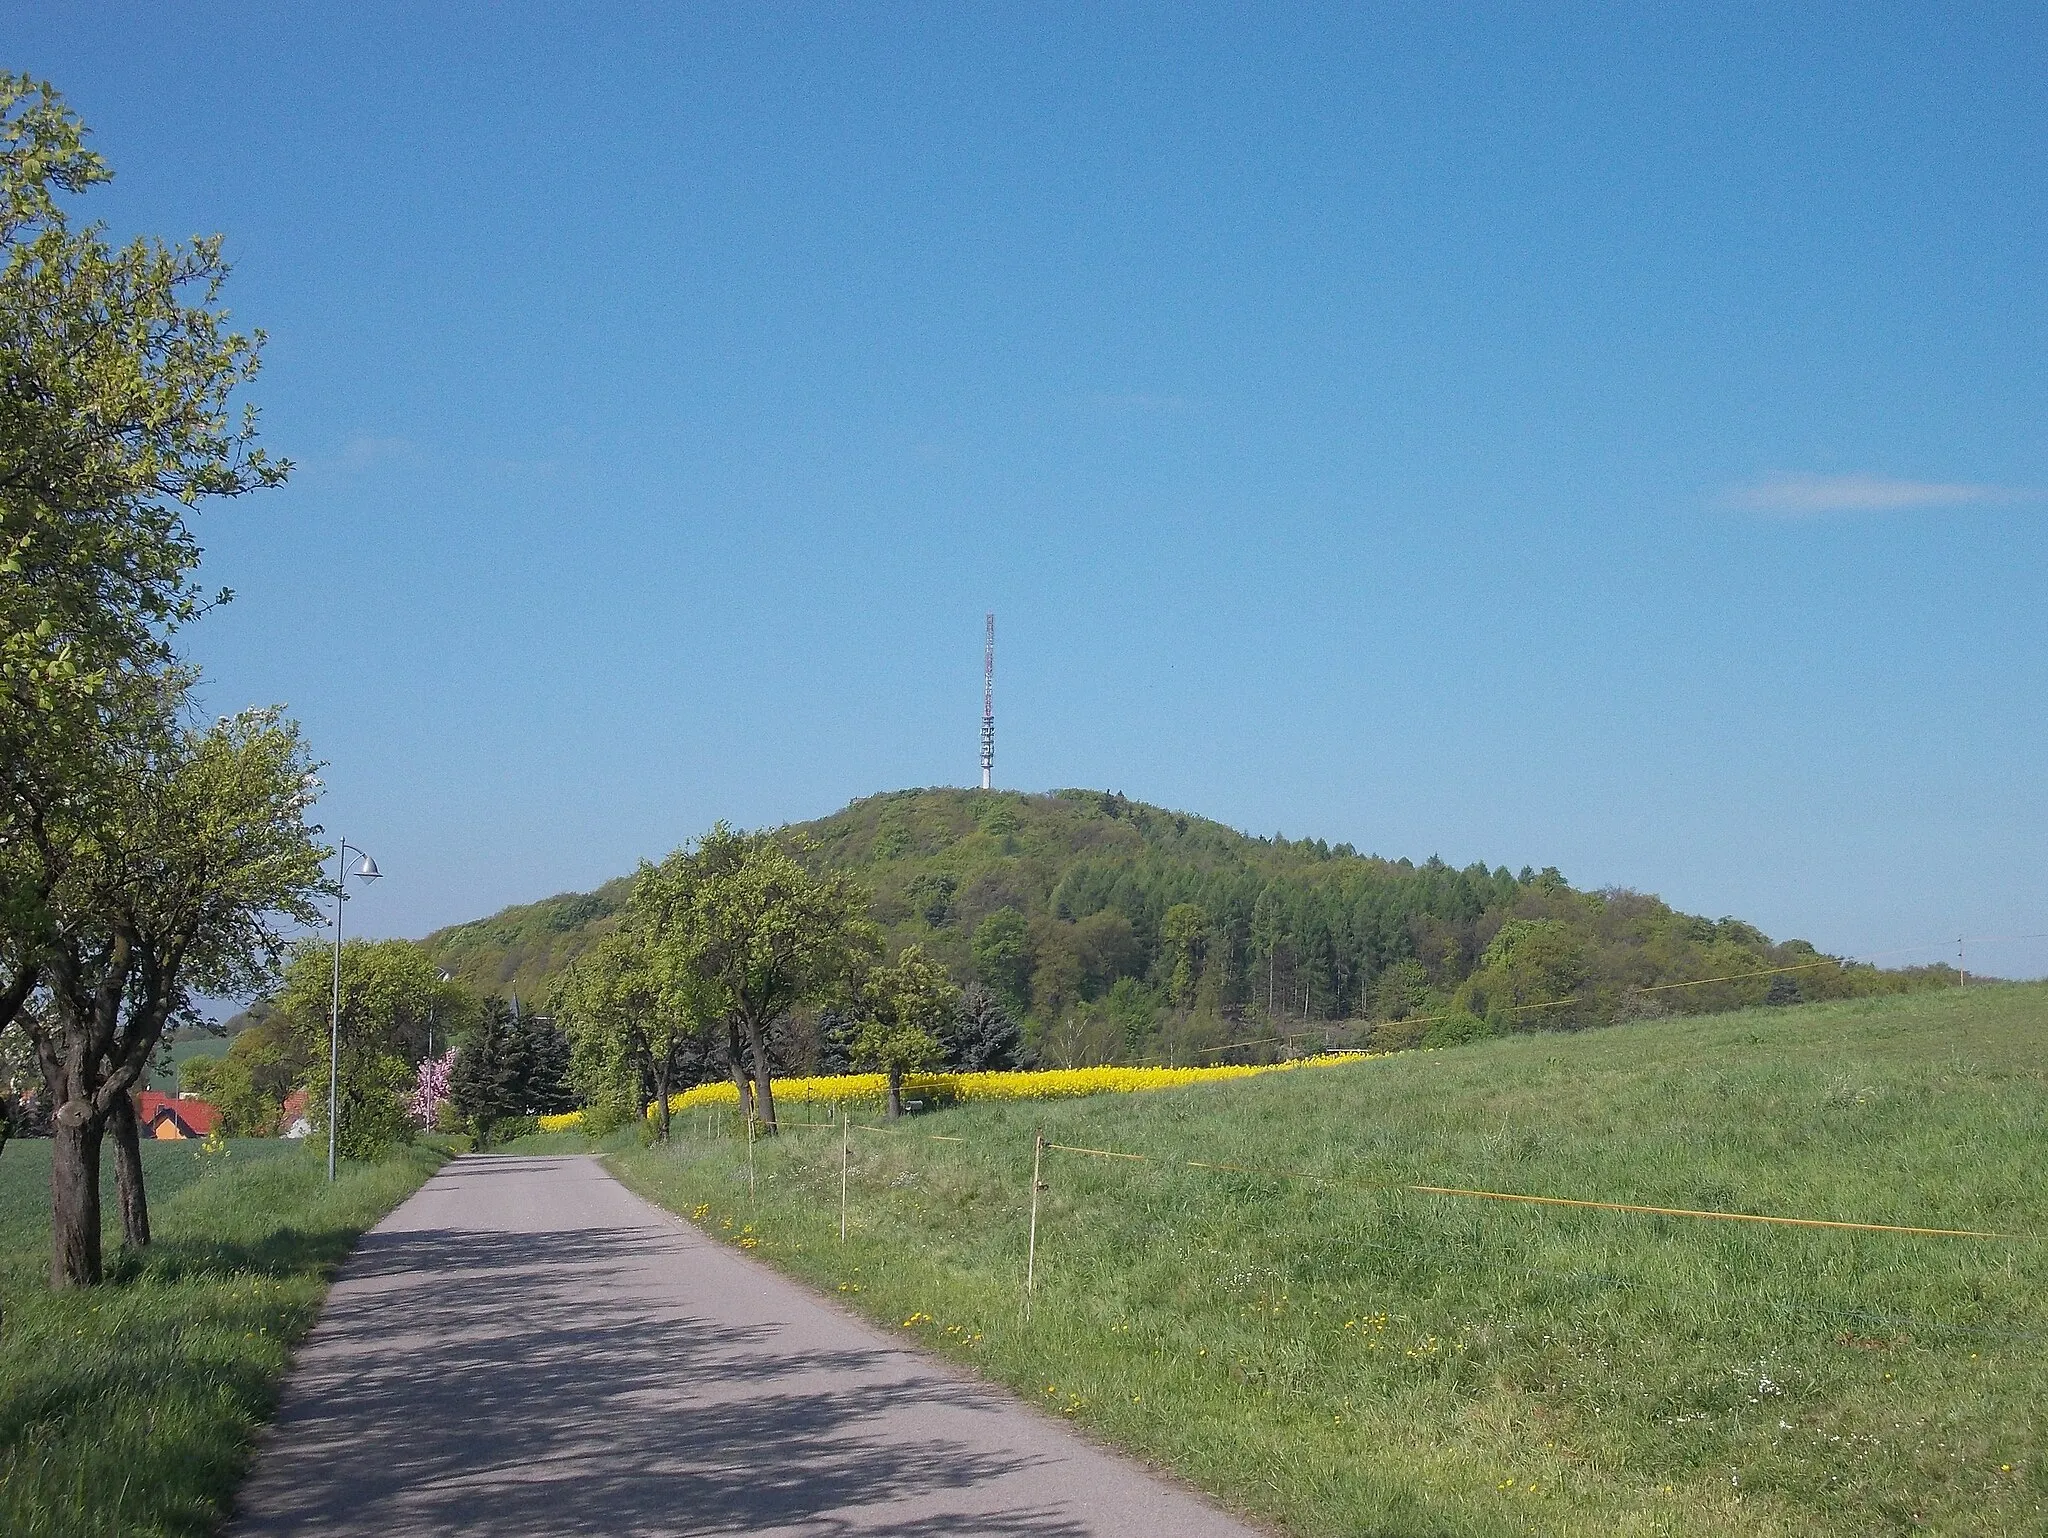 Photo showing: Collmberg hill from the east (Wermsdorf, Nordsachsen district, Saxony)